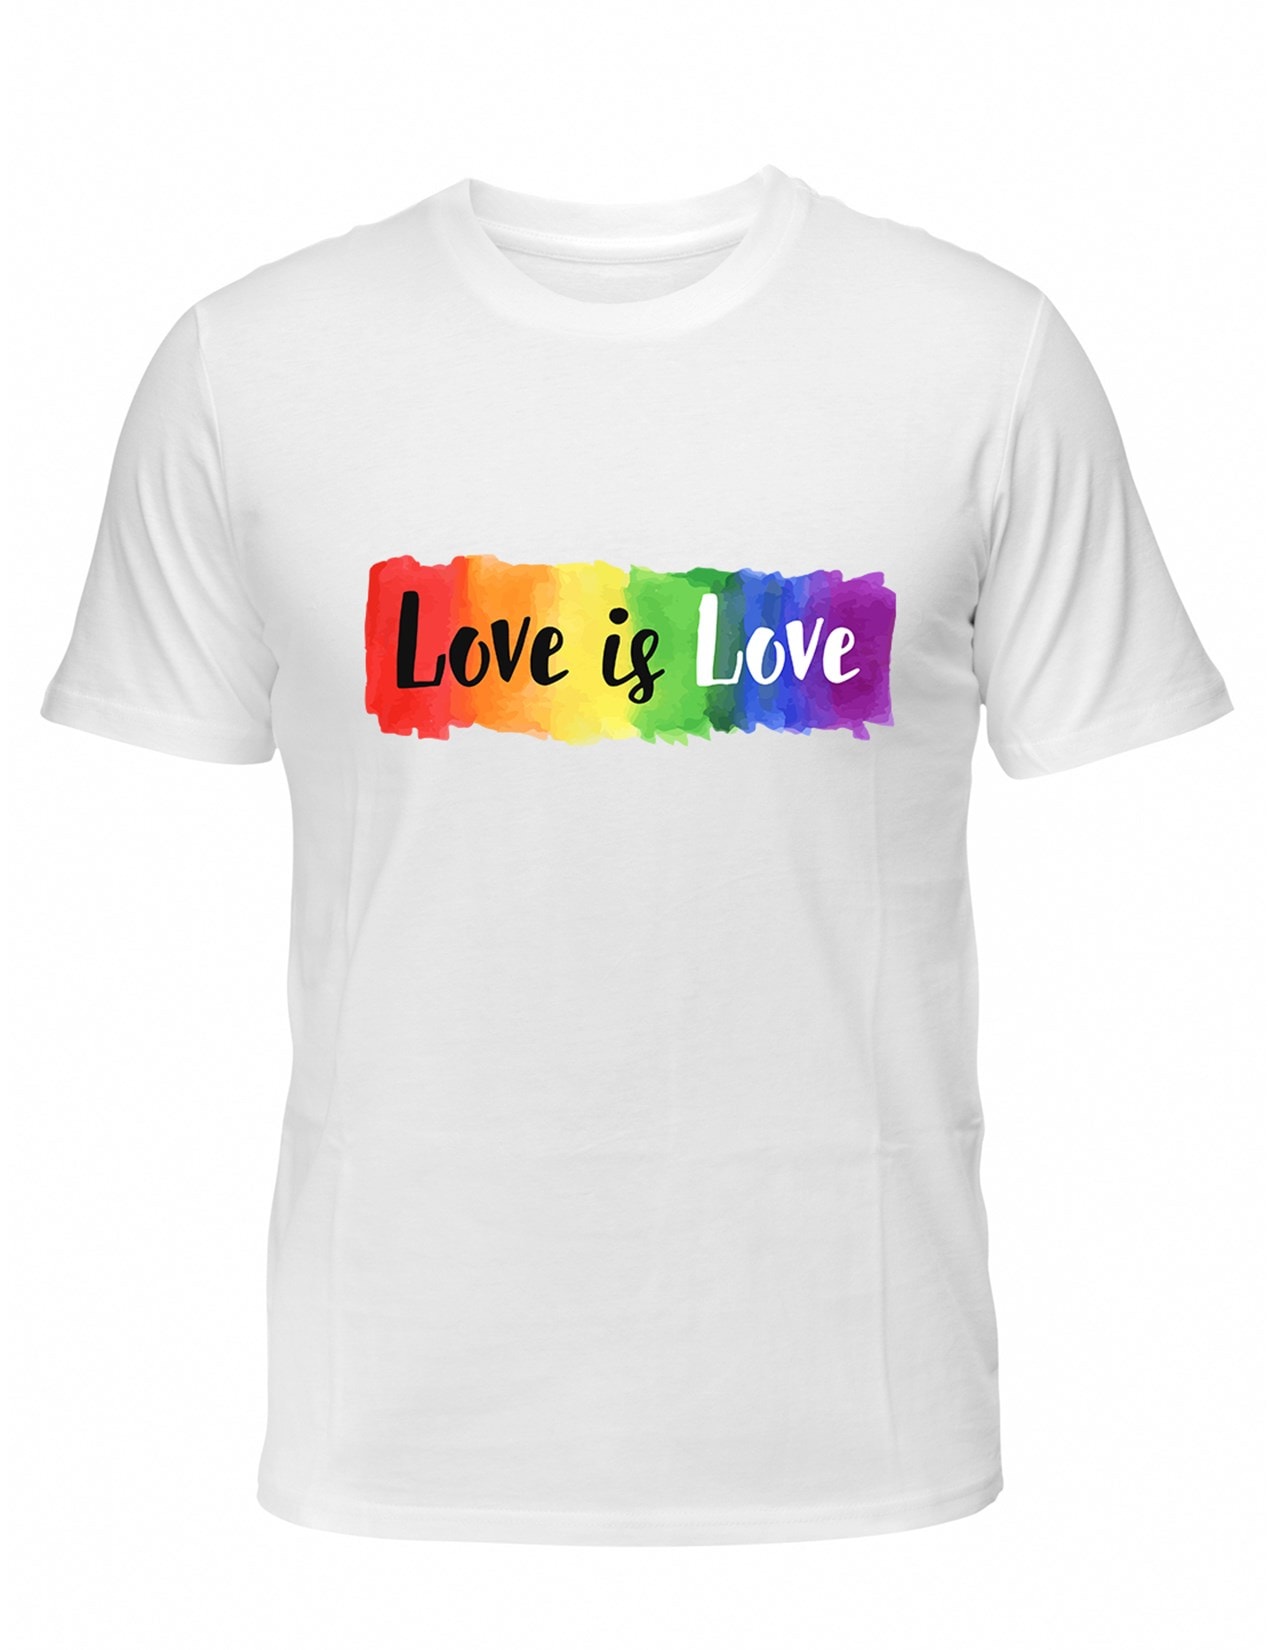 LGBT Pride: Love Is Love | T-Shirt | Free shipping over £20 | HMV Store